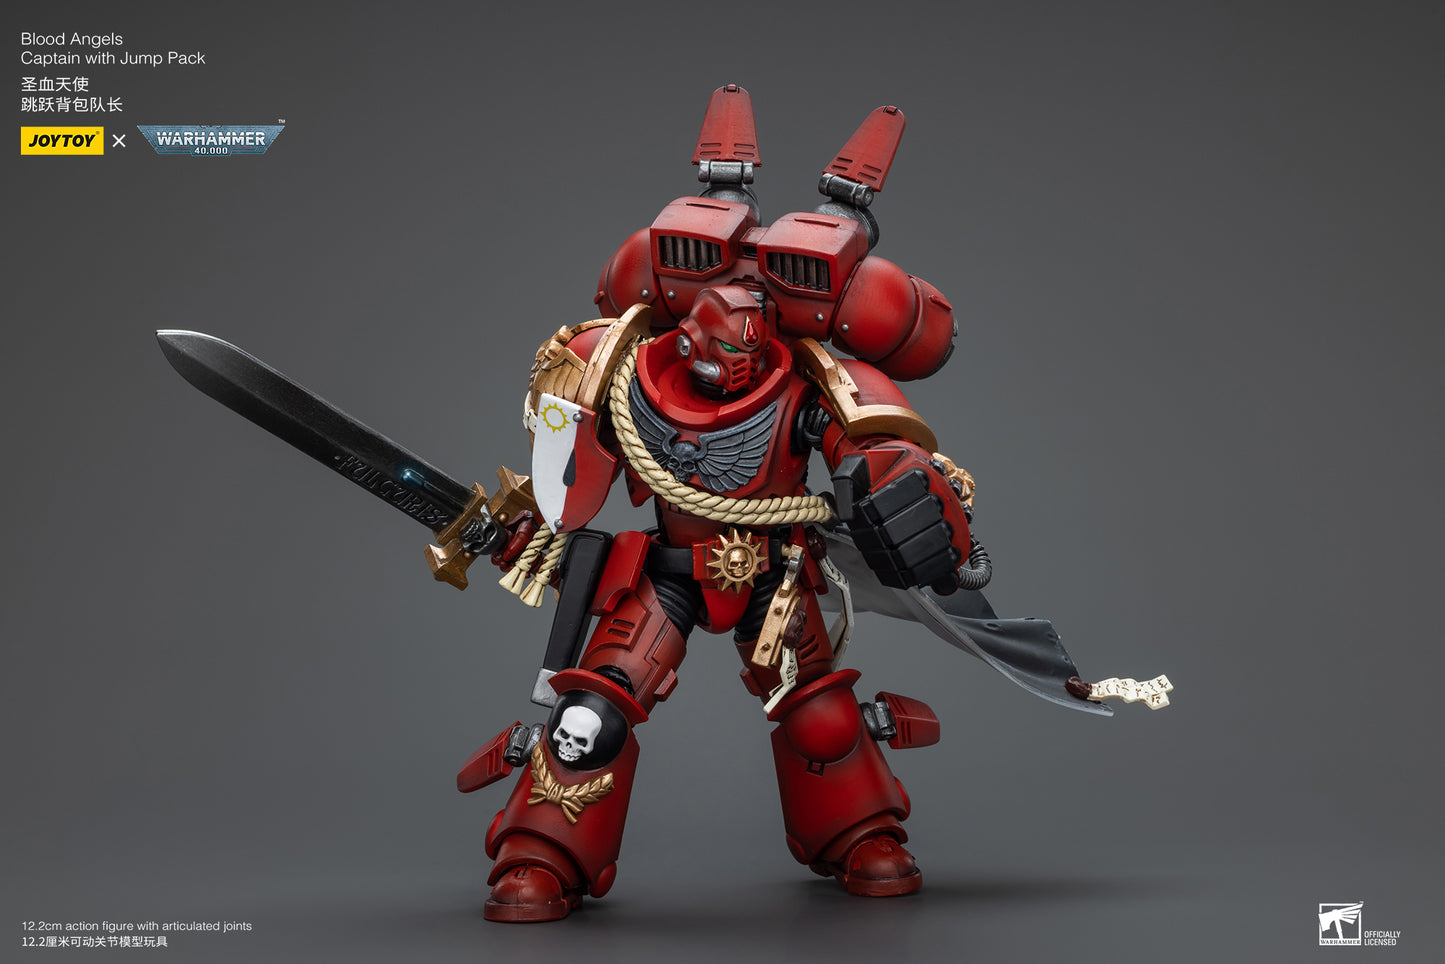 Blood Angels  Captain With Jump Pack  - Warhammer 40K Action Figure By JOYTOY